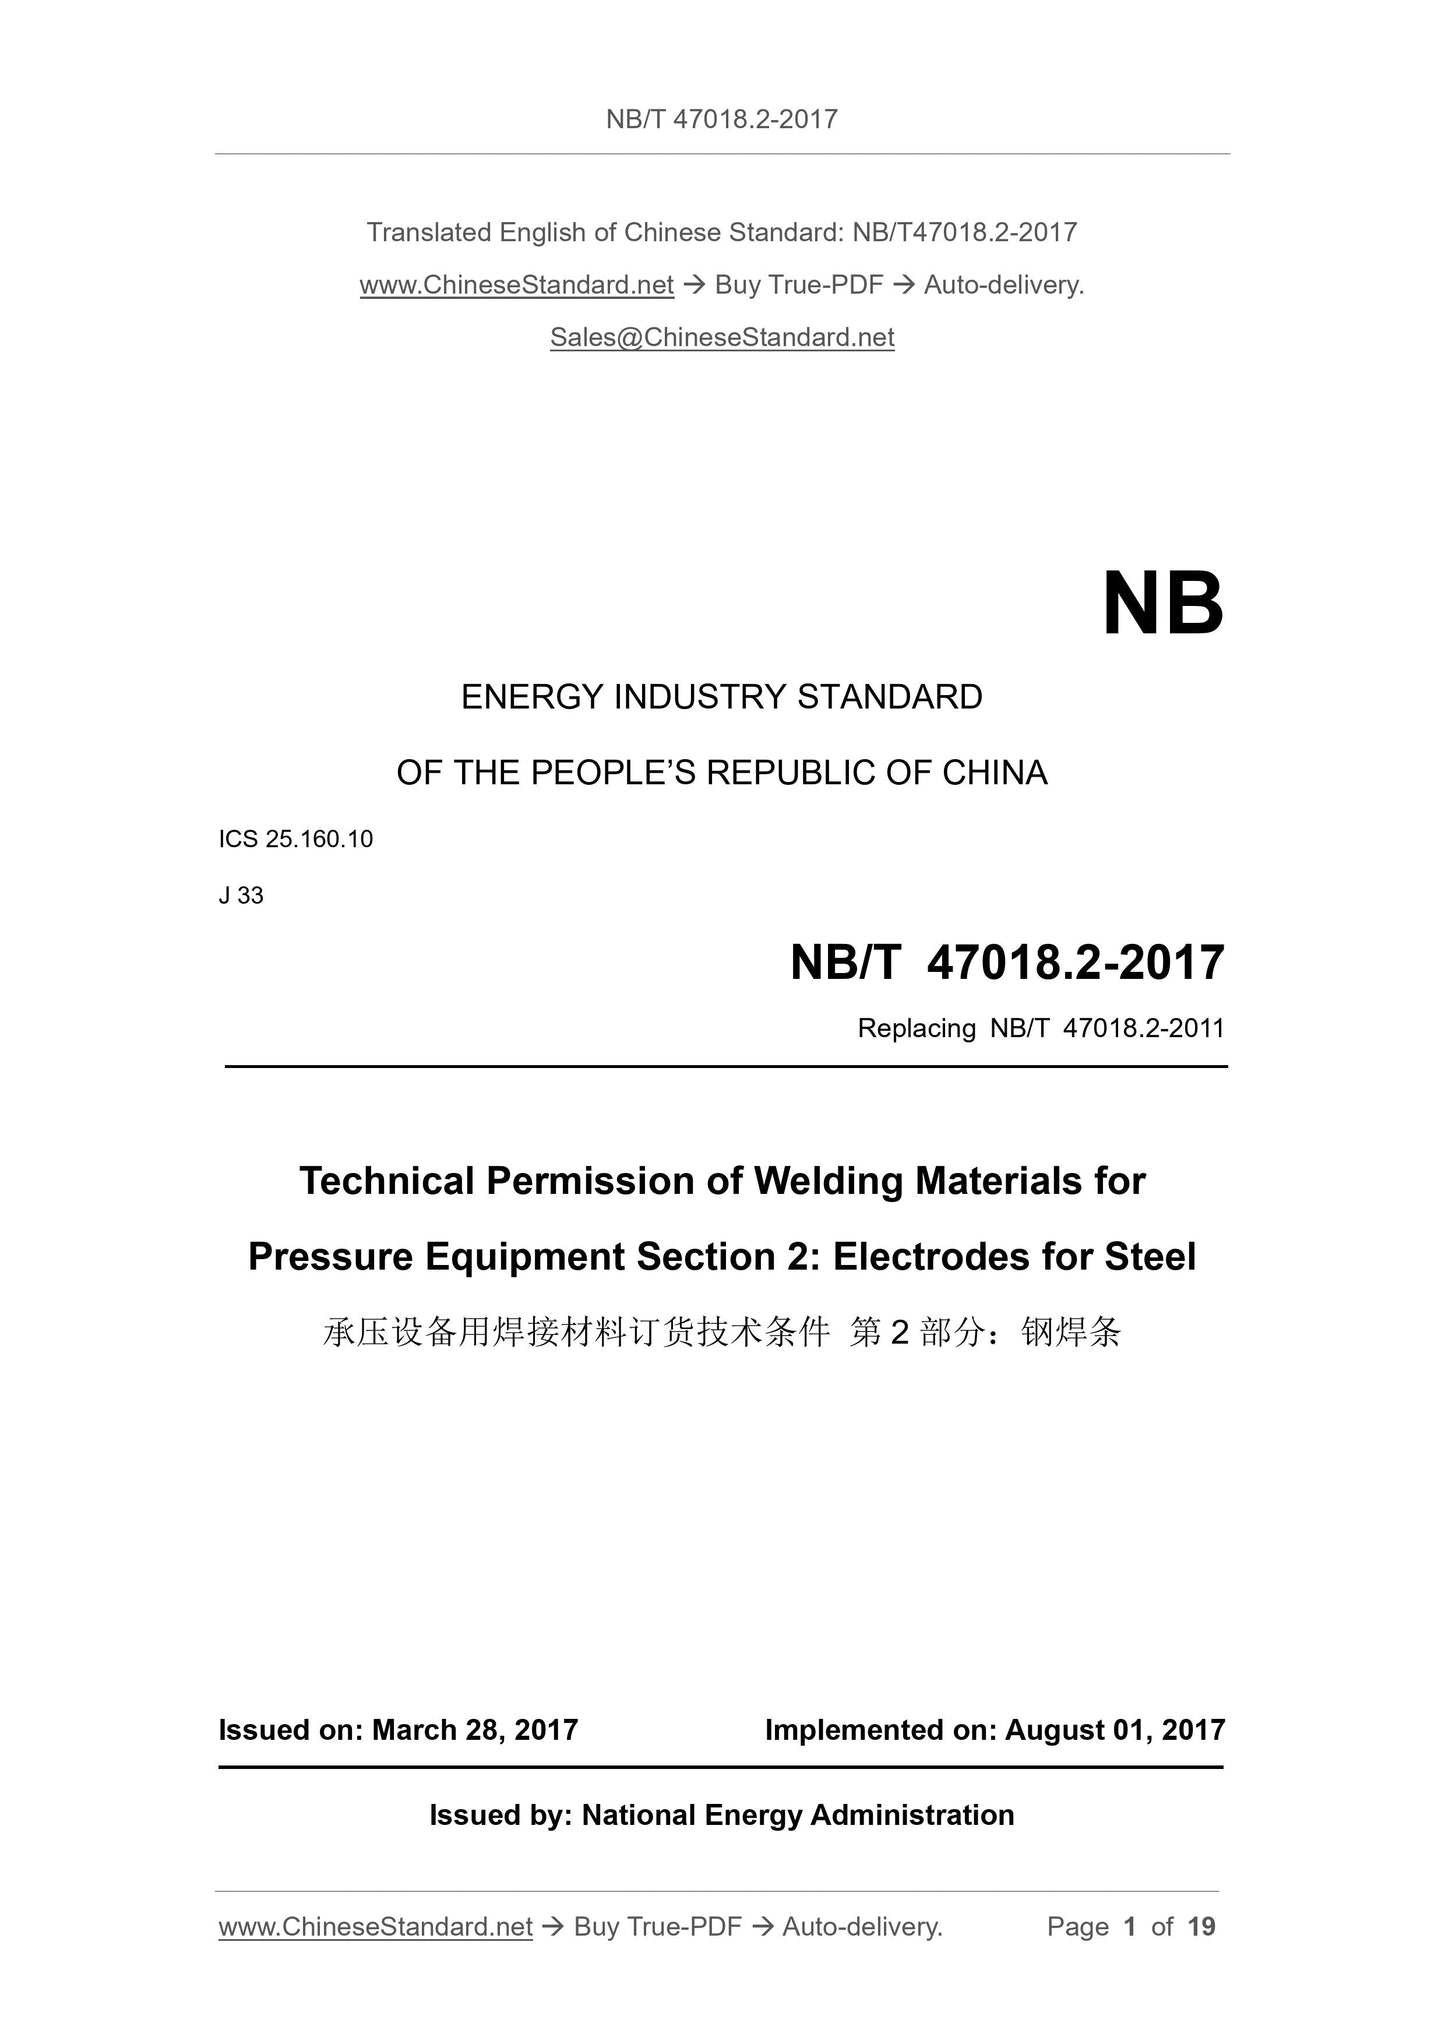 NB/T 47018.2-2017 Page 1